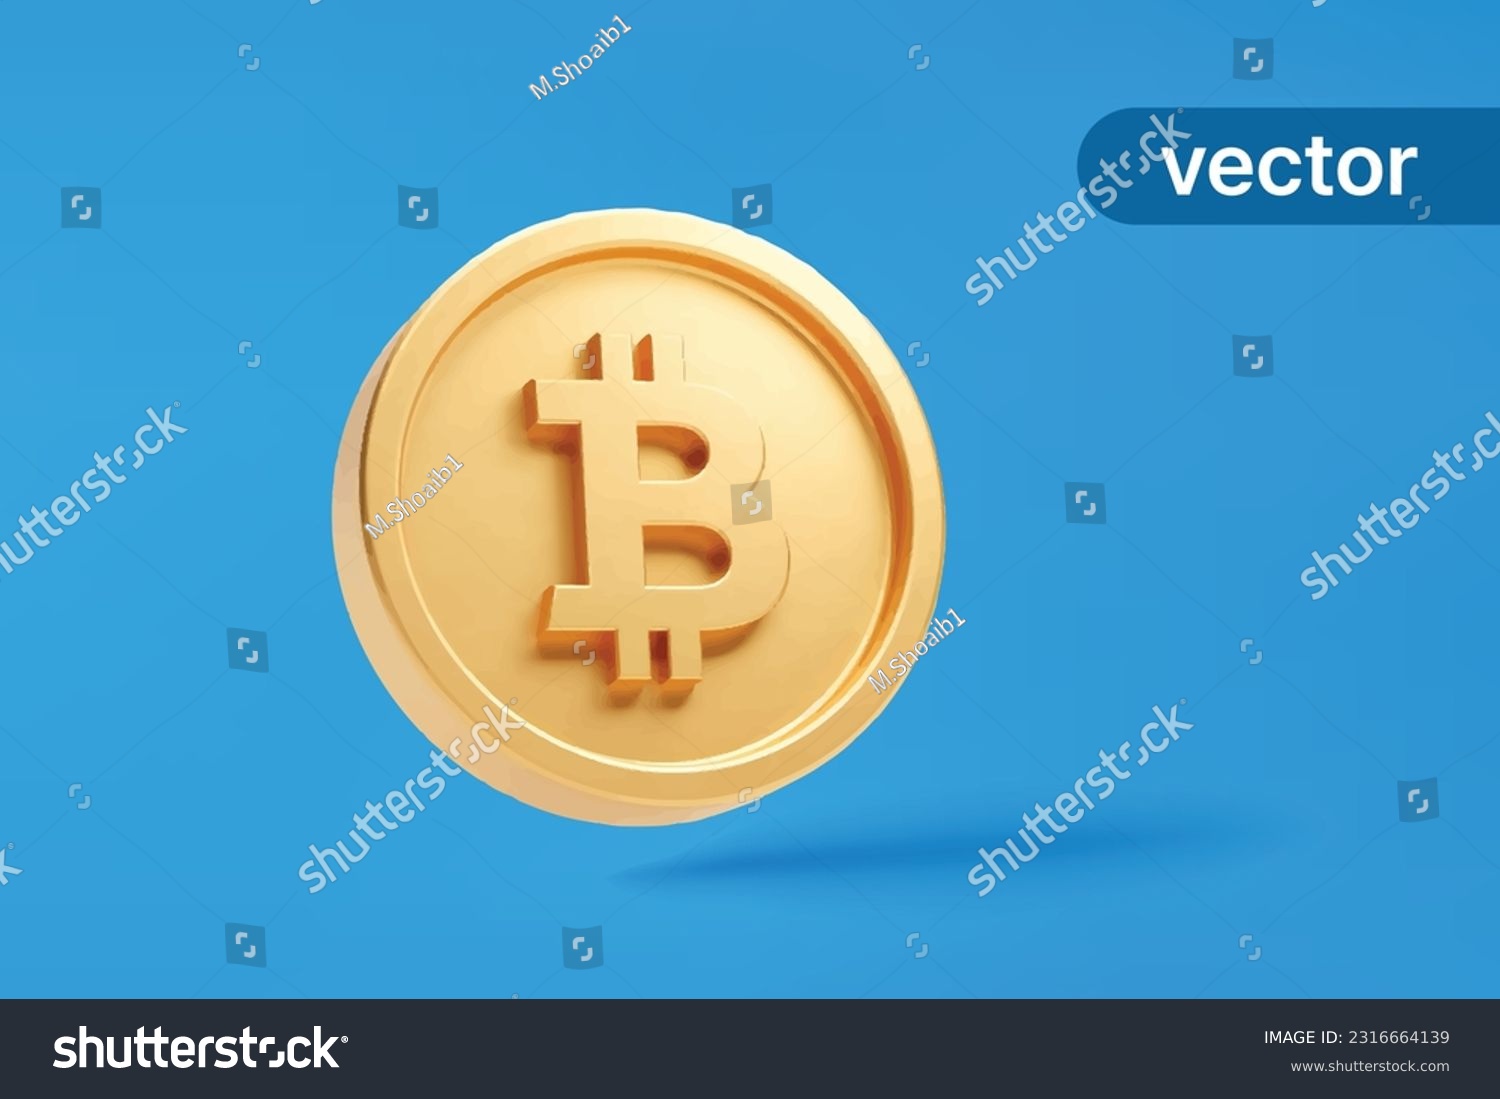 SVG of Gold coin bitcoin btc currency money icon sign or symbol business and financial exchange on blue background 3D vector illustration svg